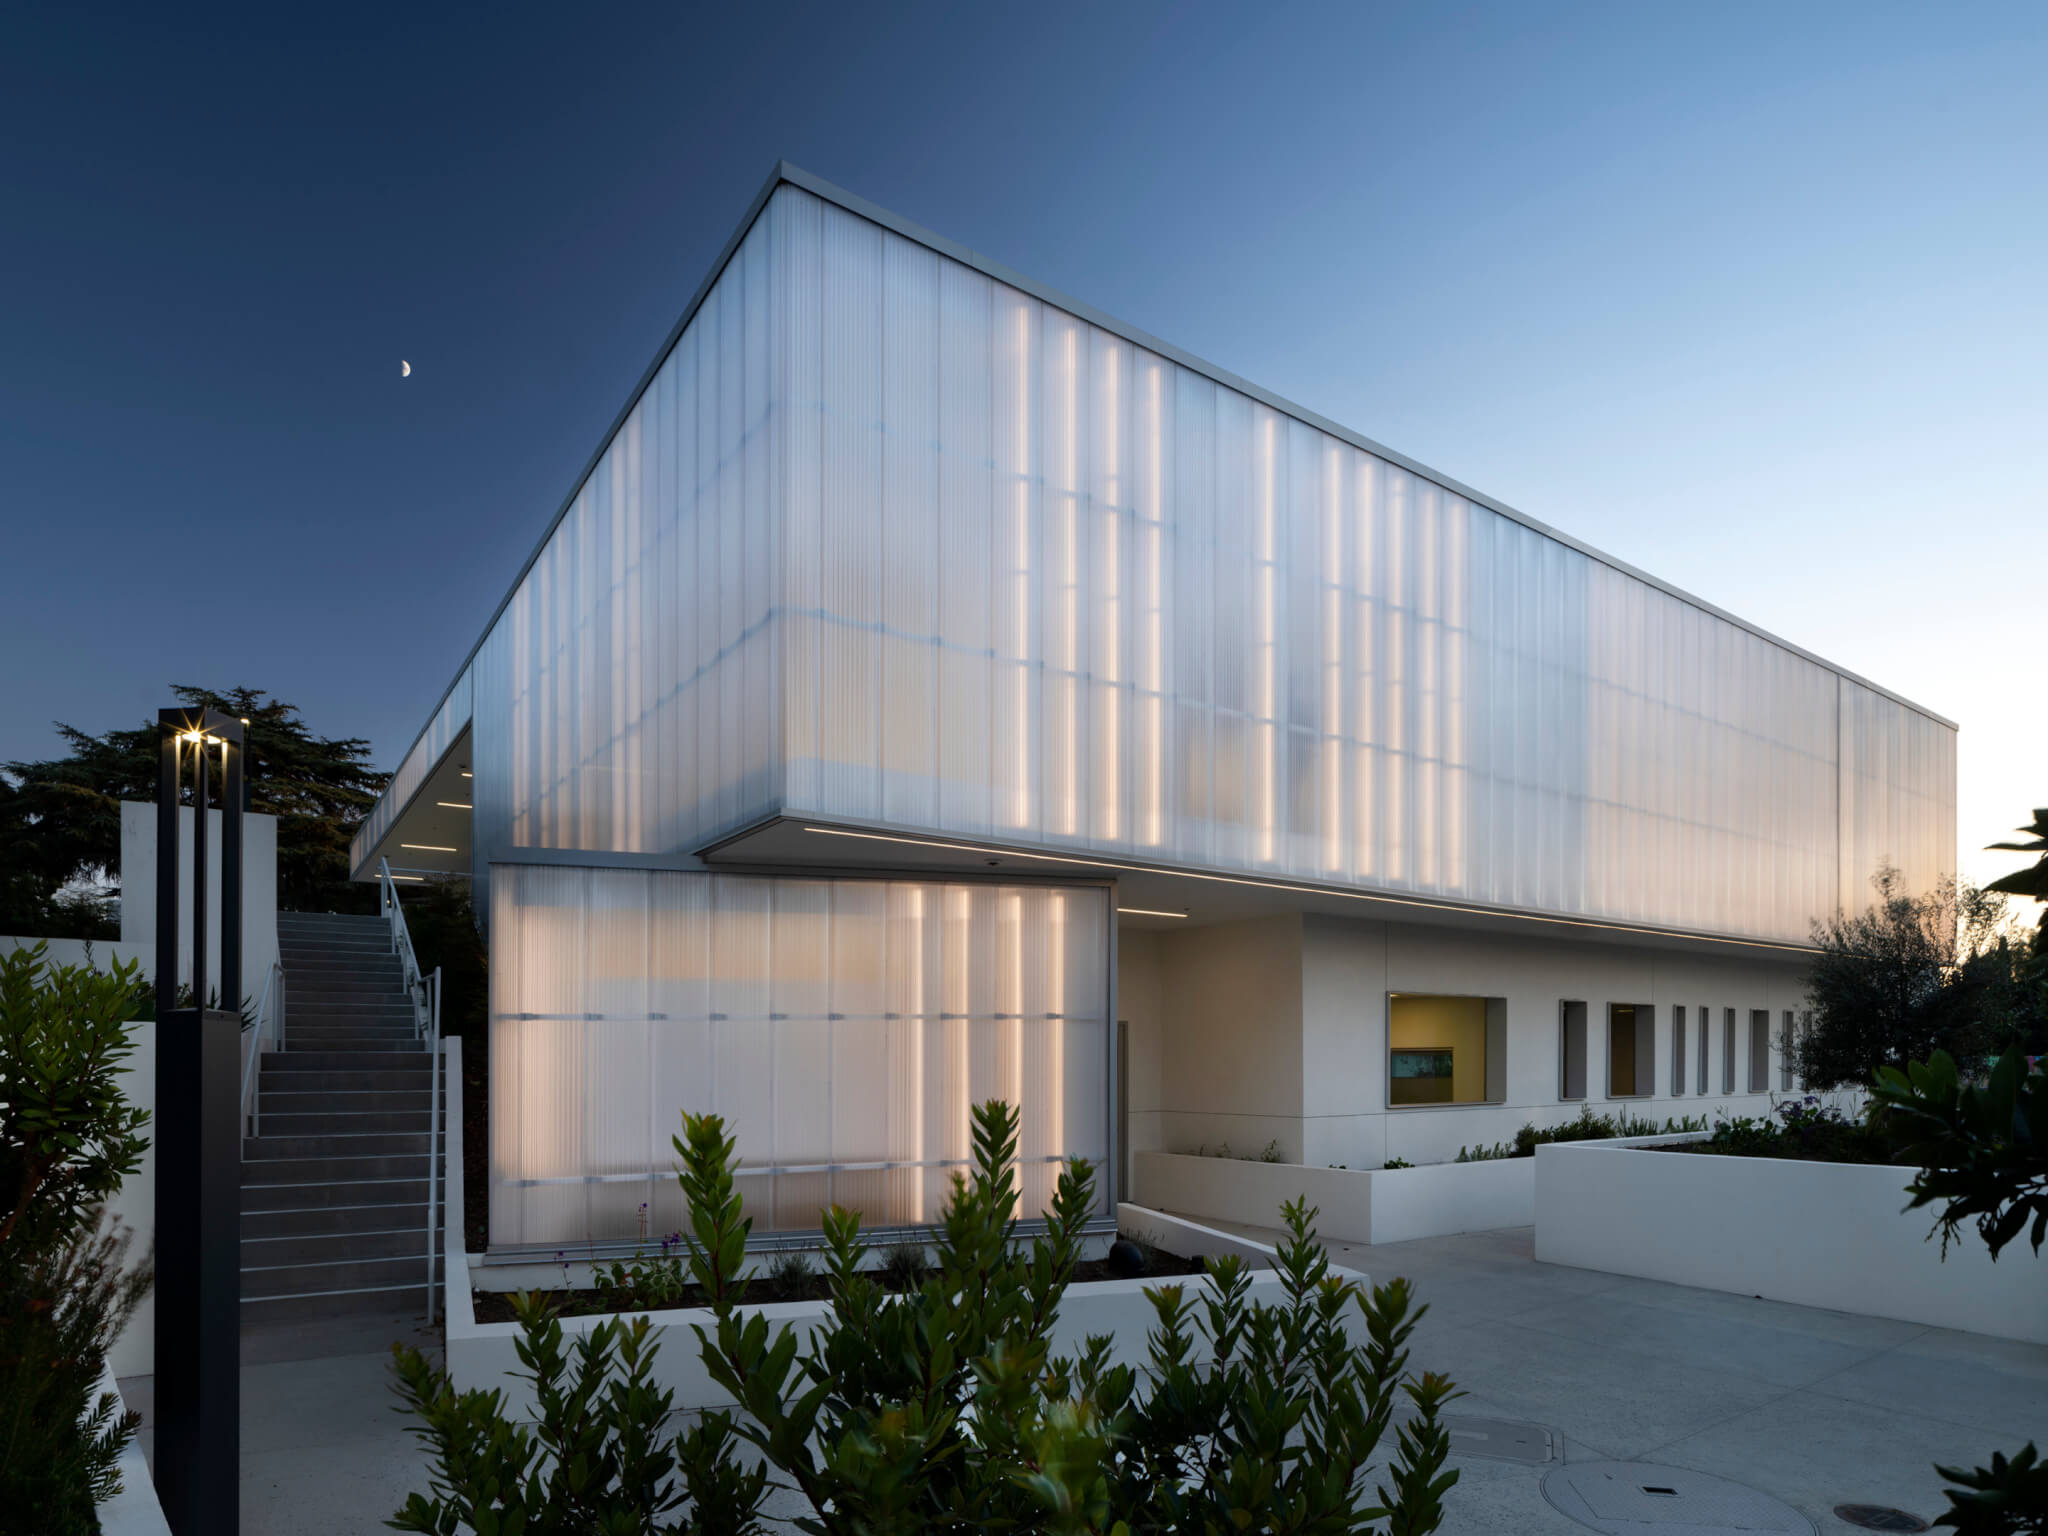 Facades+ is coming to the City of Angels on November 3 and 4